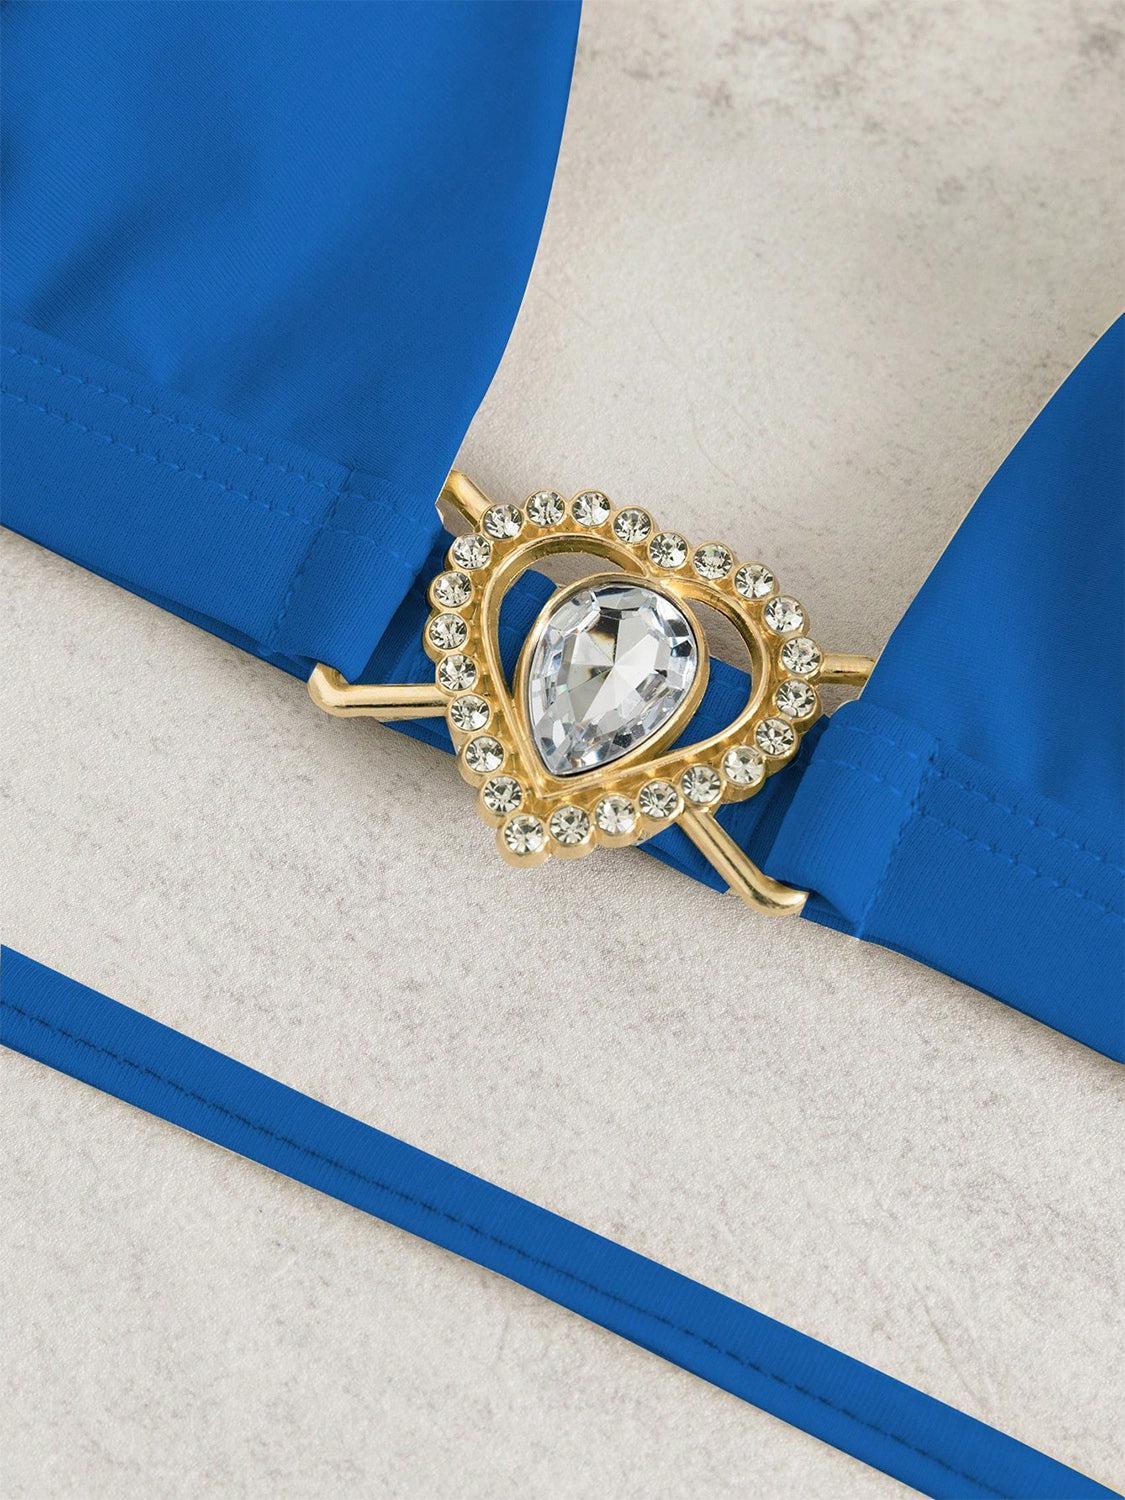 a close up of a brooch with a blue ribbon